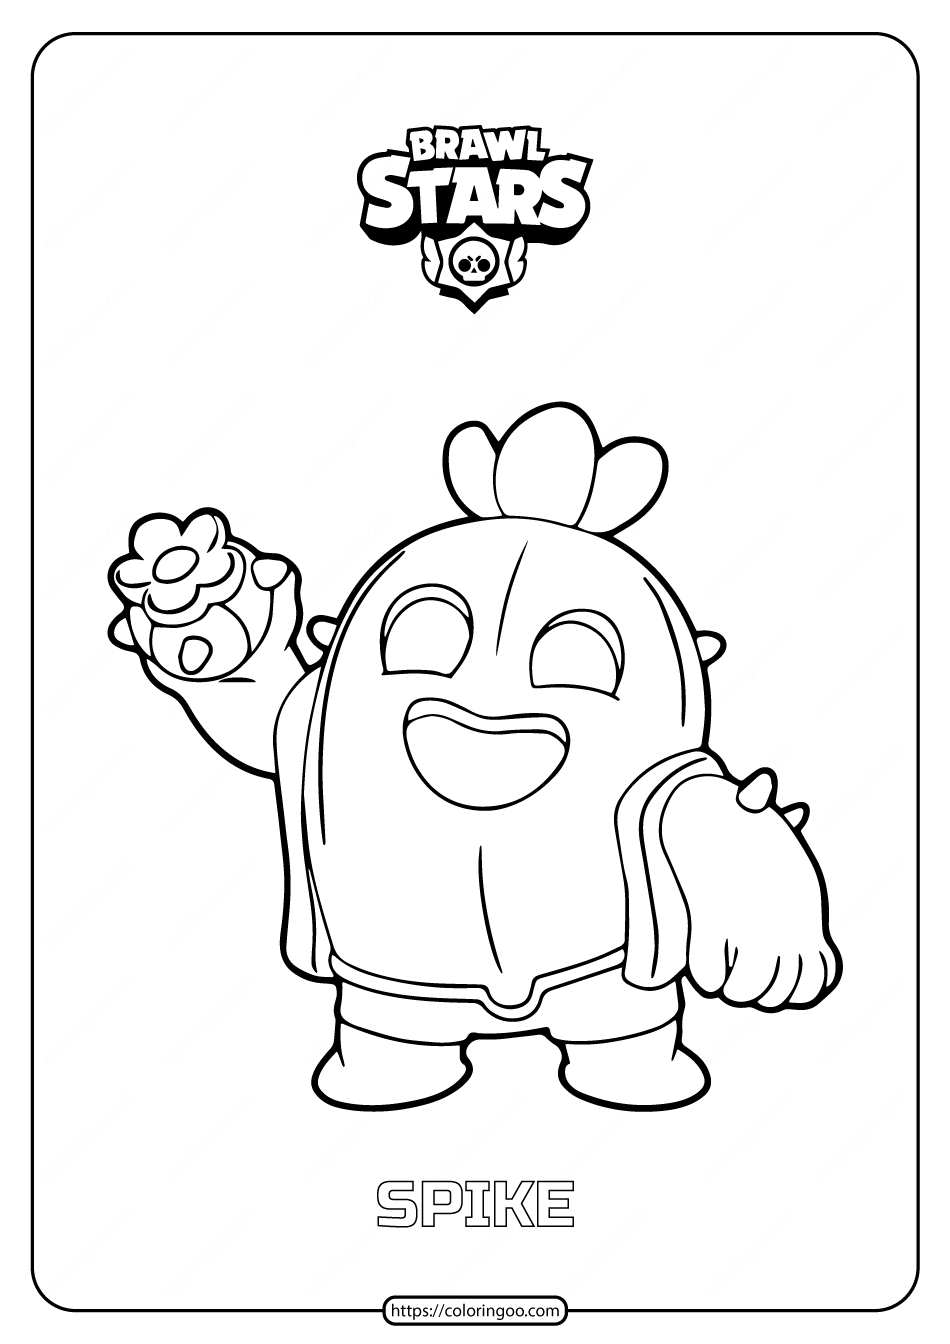 free printable brawl stars spike coloring pages